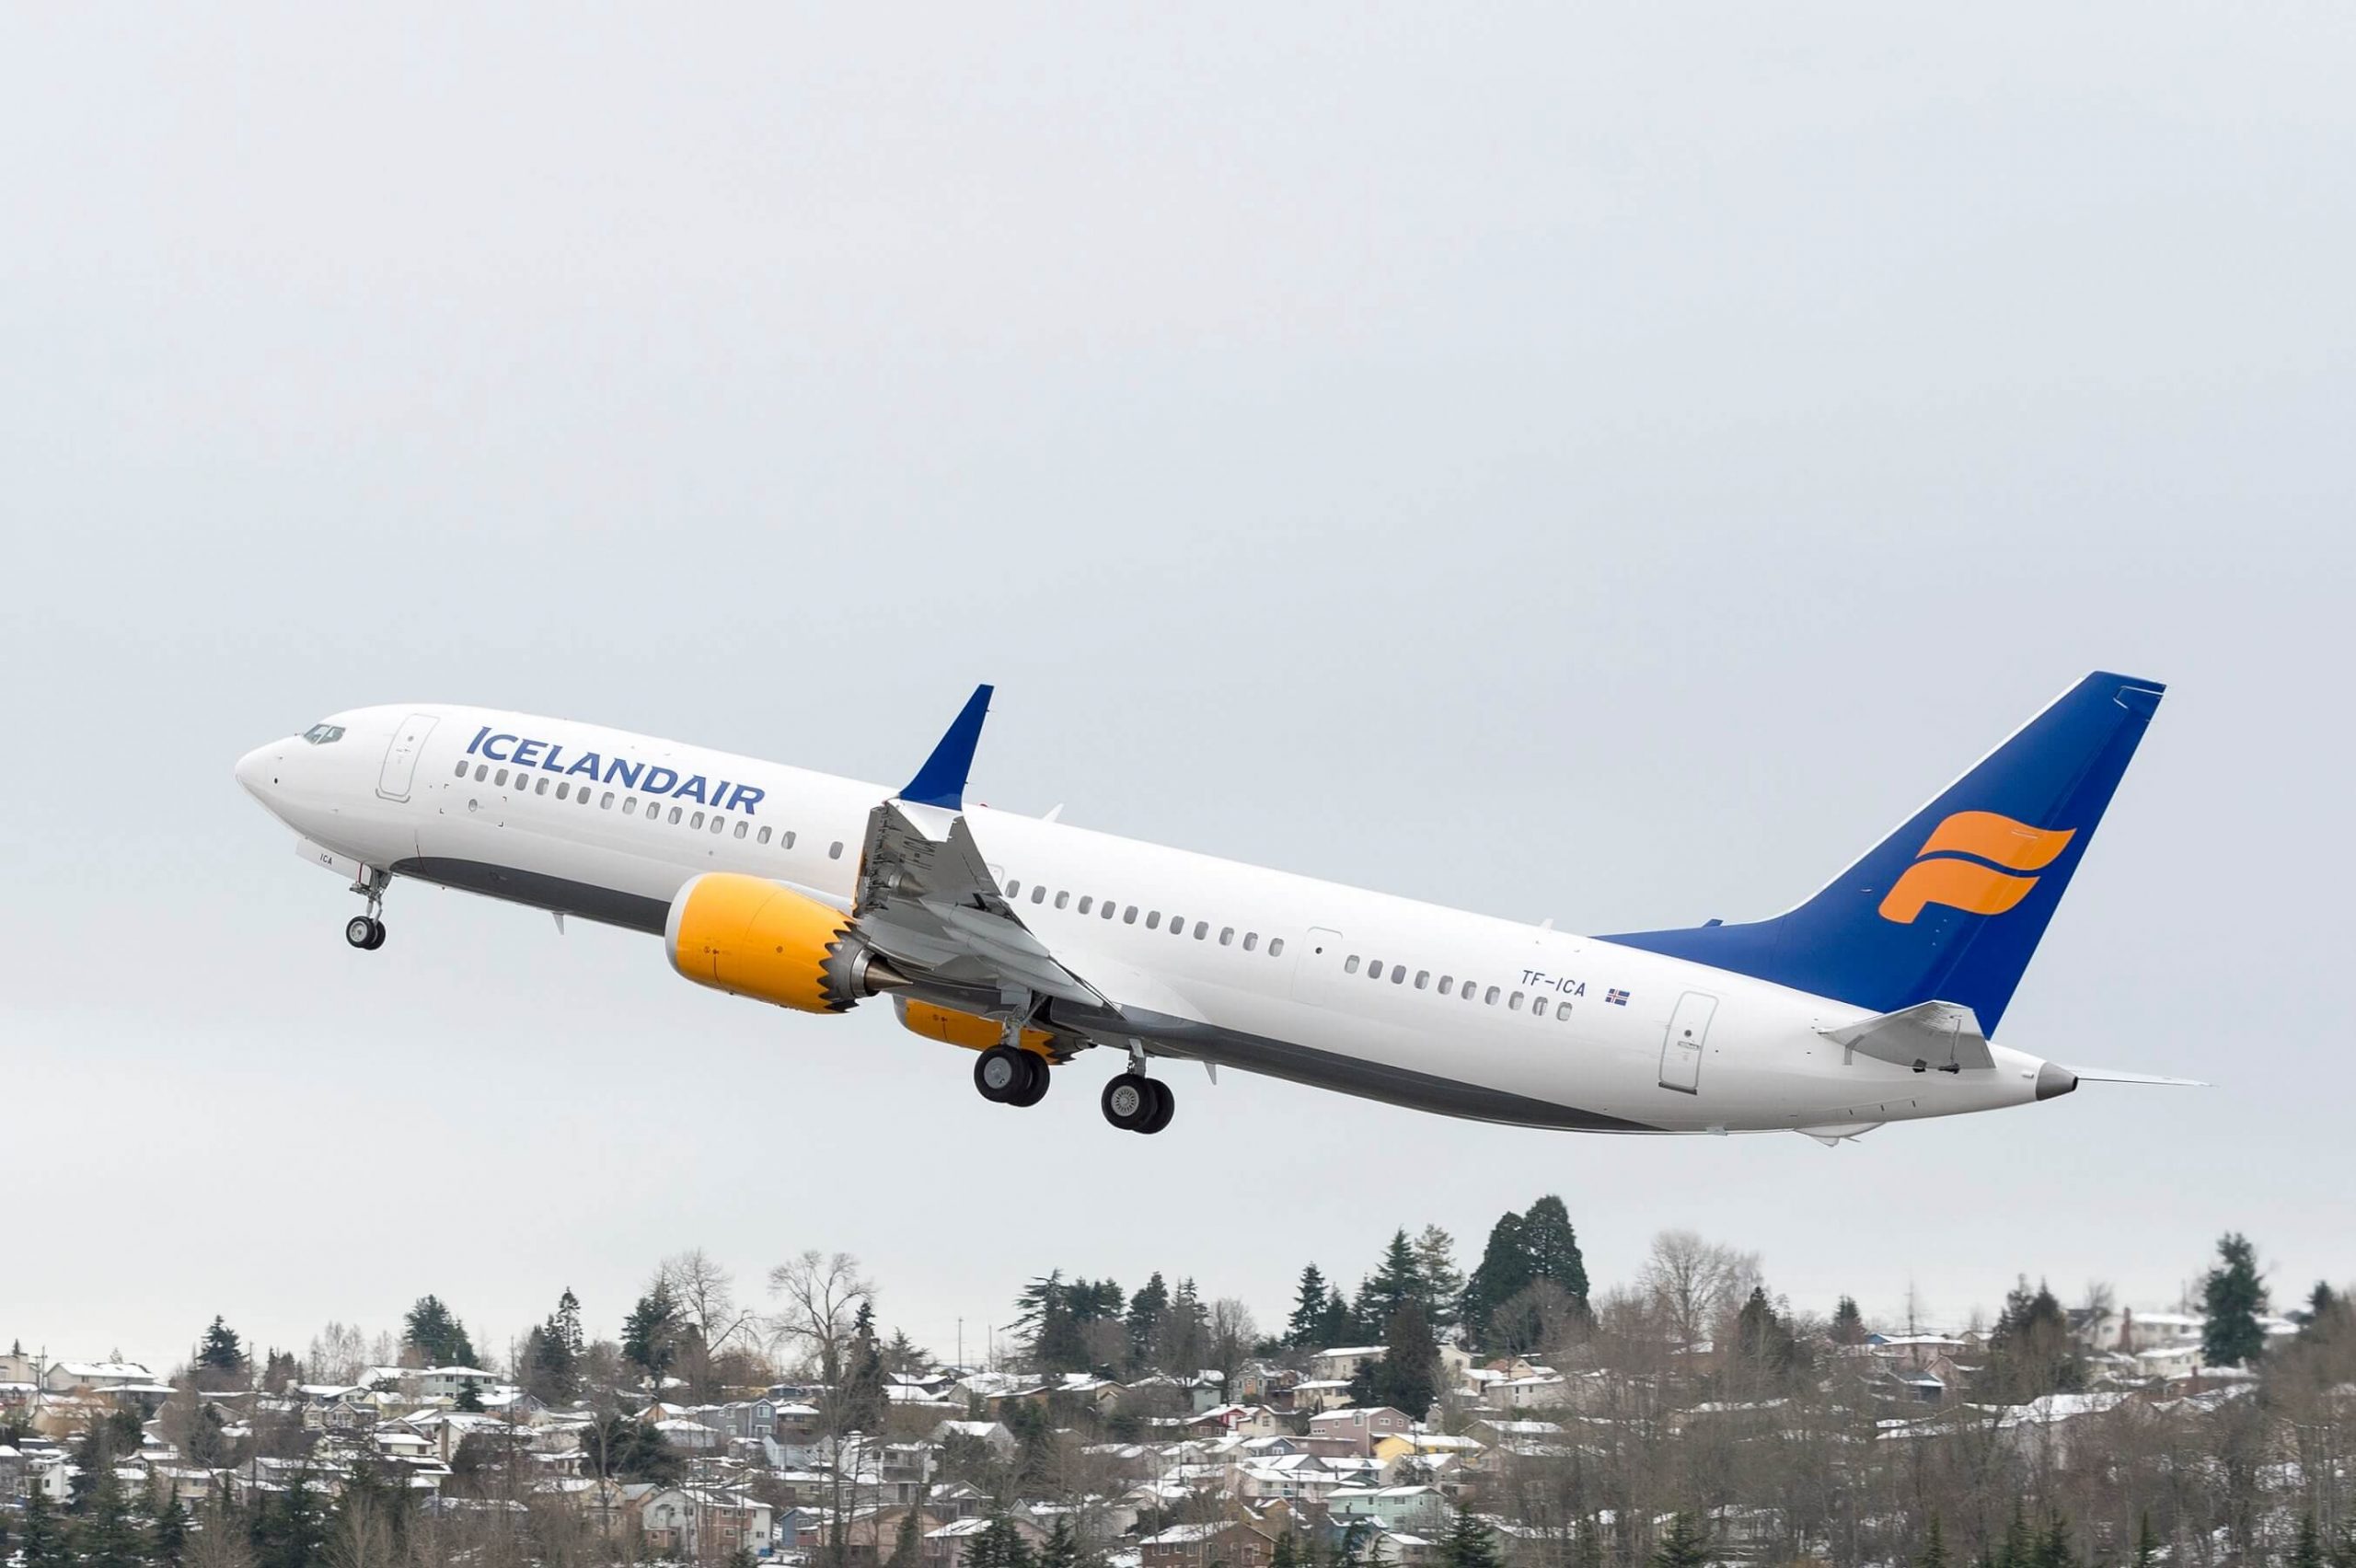 BOC Aviation delivers first 737Max 9 aircraft